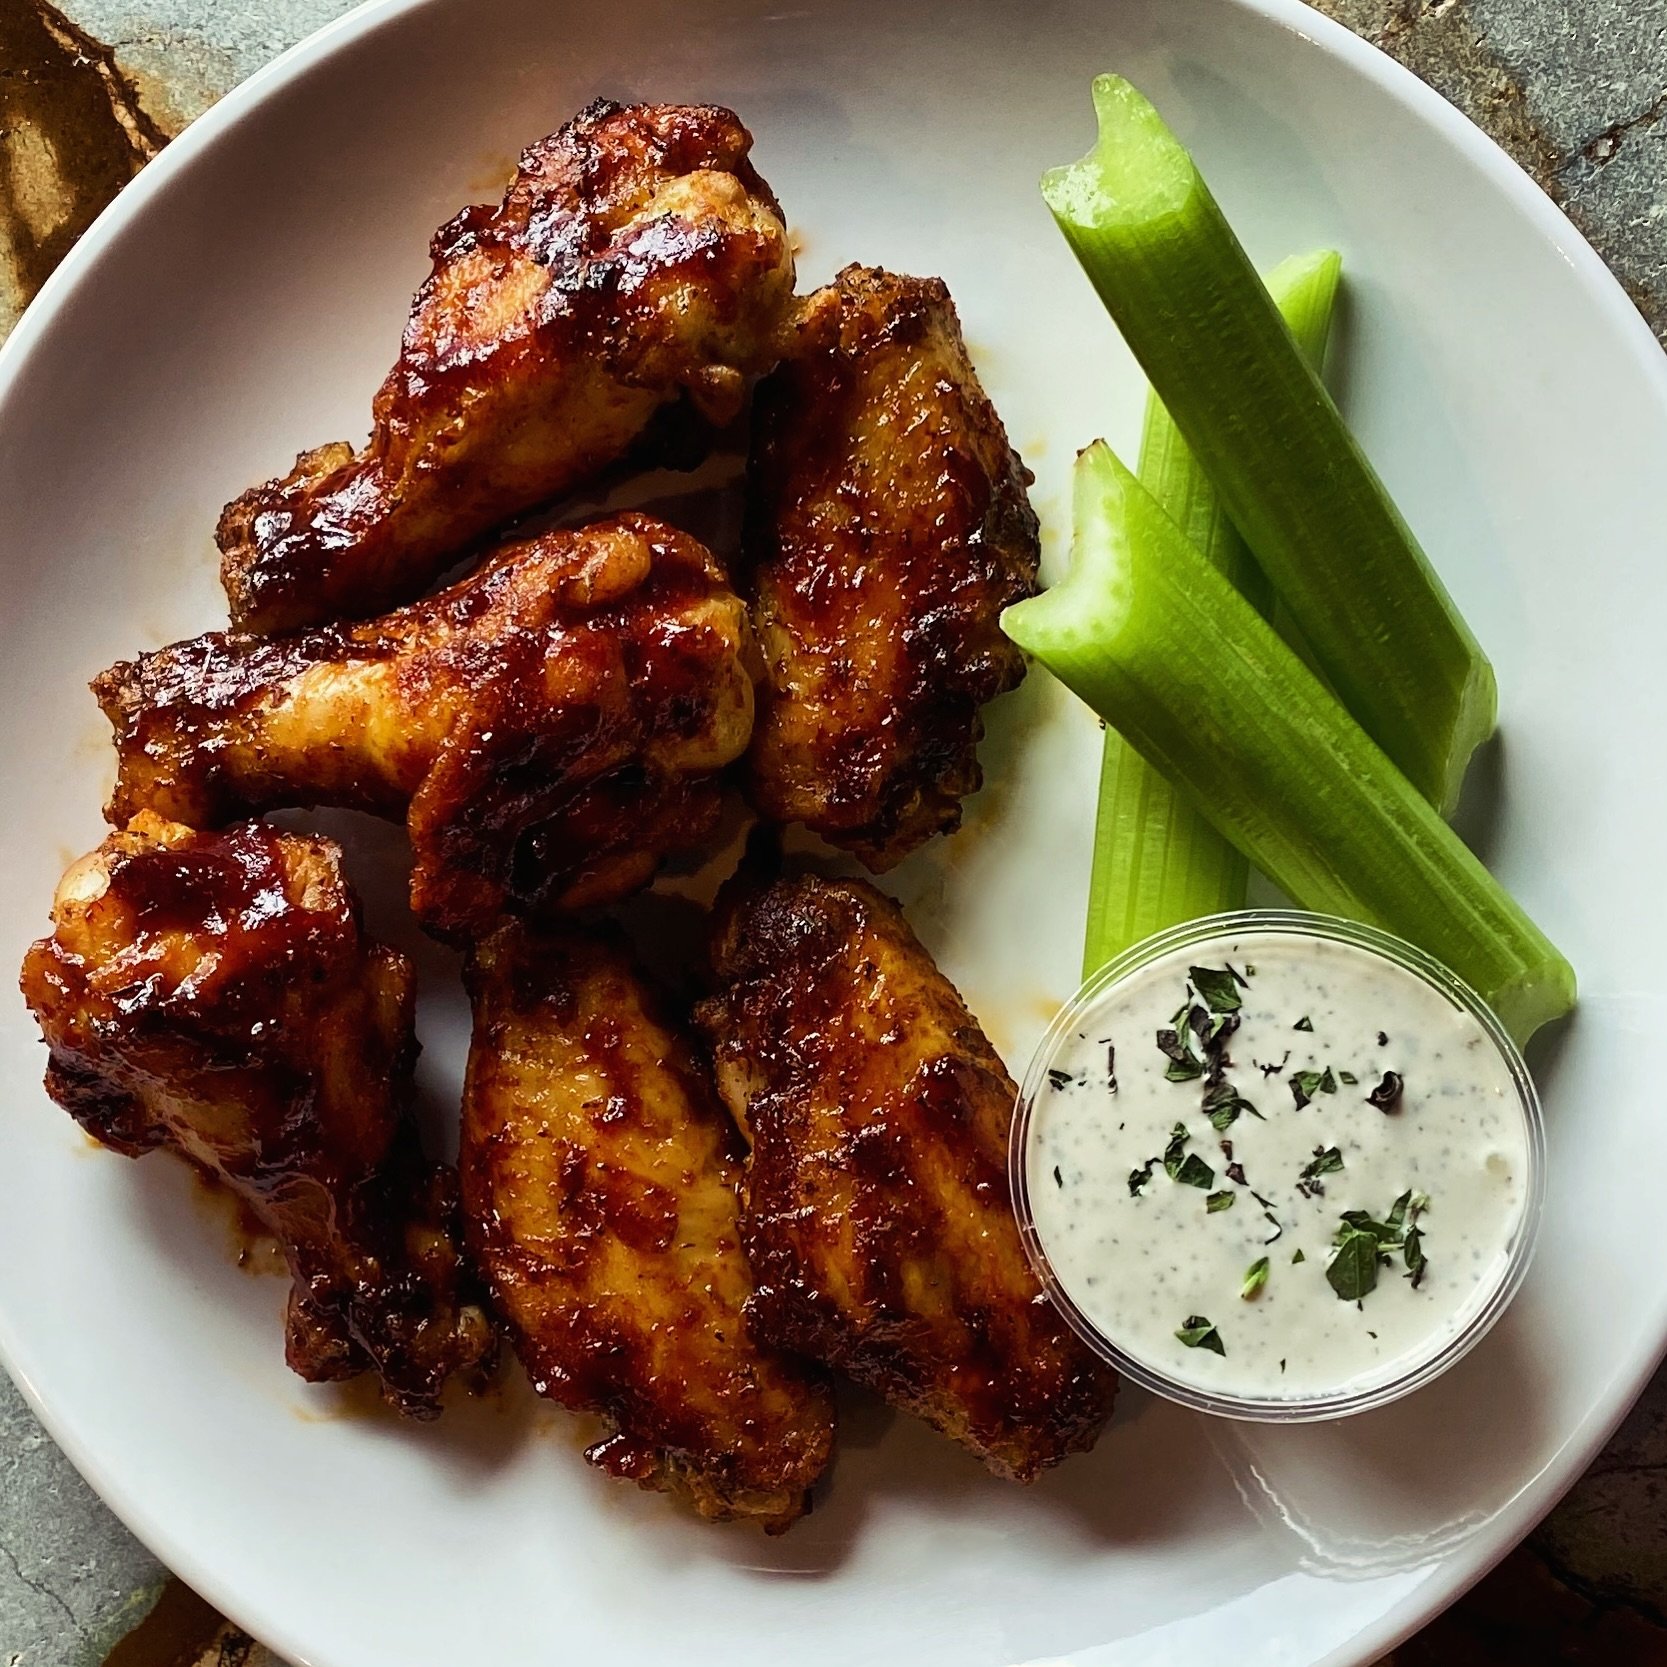 A perfect way to end your day or begin your dinner- our beer-brined wood-fired wings- bbq, buffalo, garlic Parm, jerk or naked -delicious every way! #wingsfordinner #woodfiredwings #wings